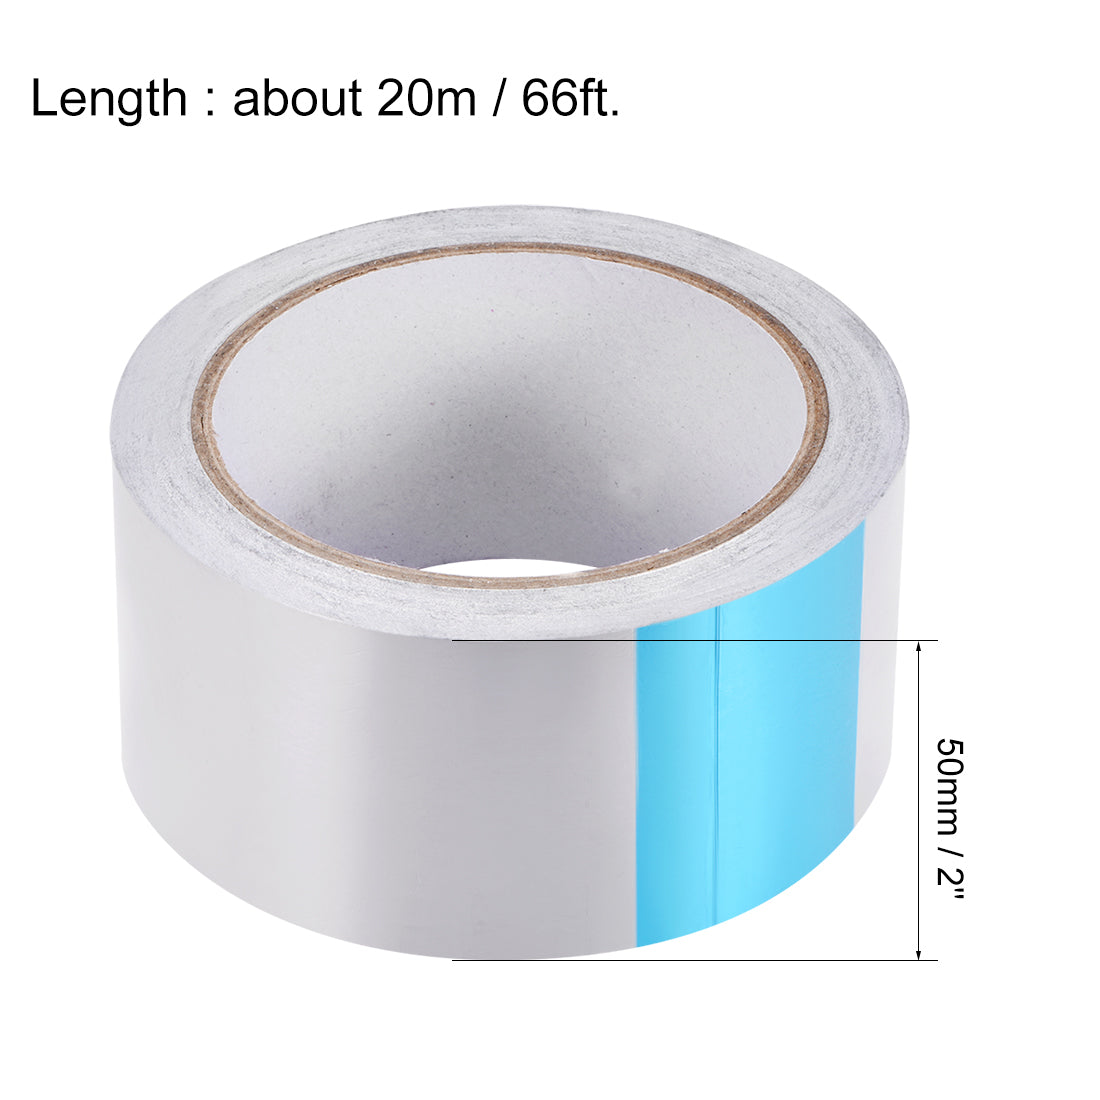 uxcell Uxcell Heat Resistant Tape - High Temperature Heat Transfer Tape Aluminum Foil Adhesive Tape 50mm x 20m(66ft)